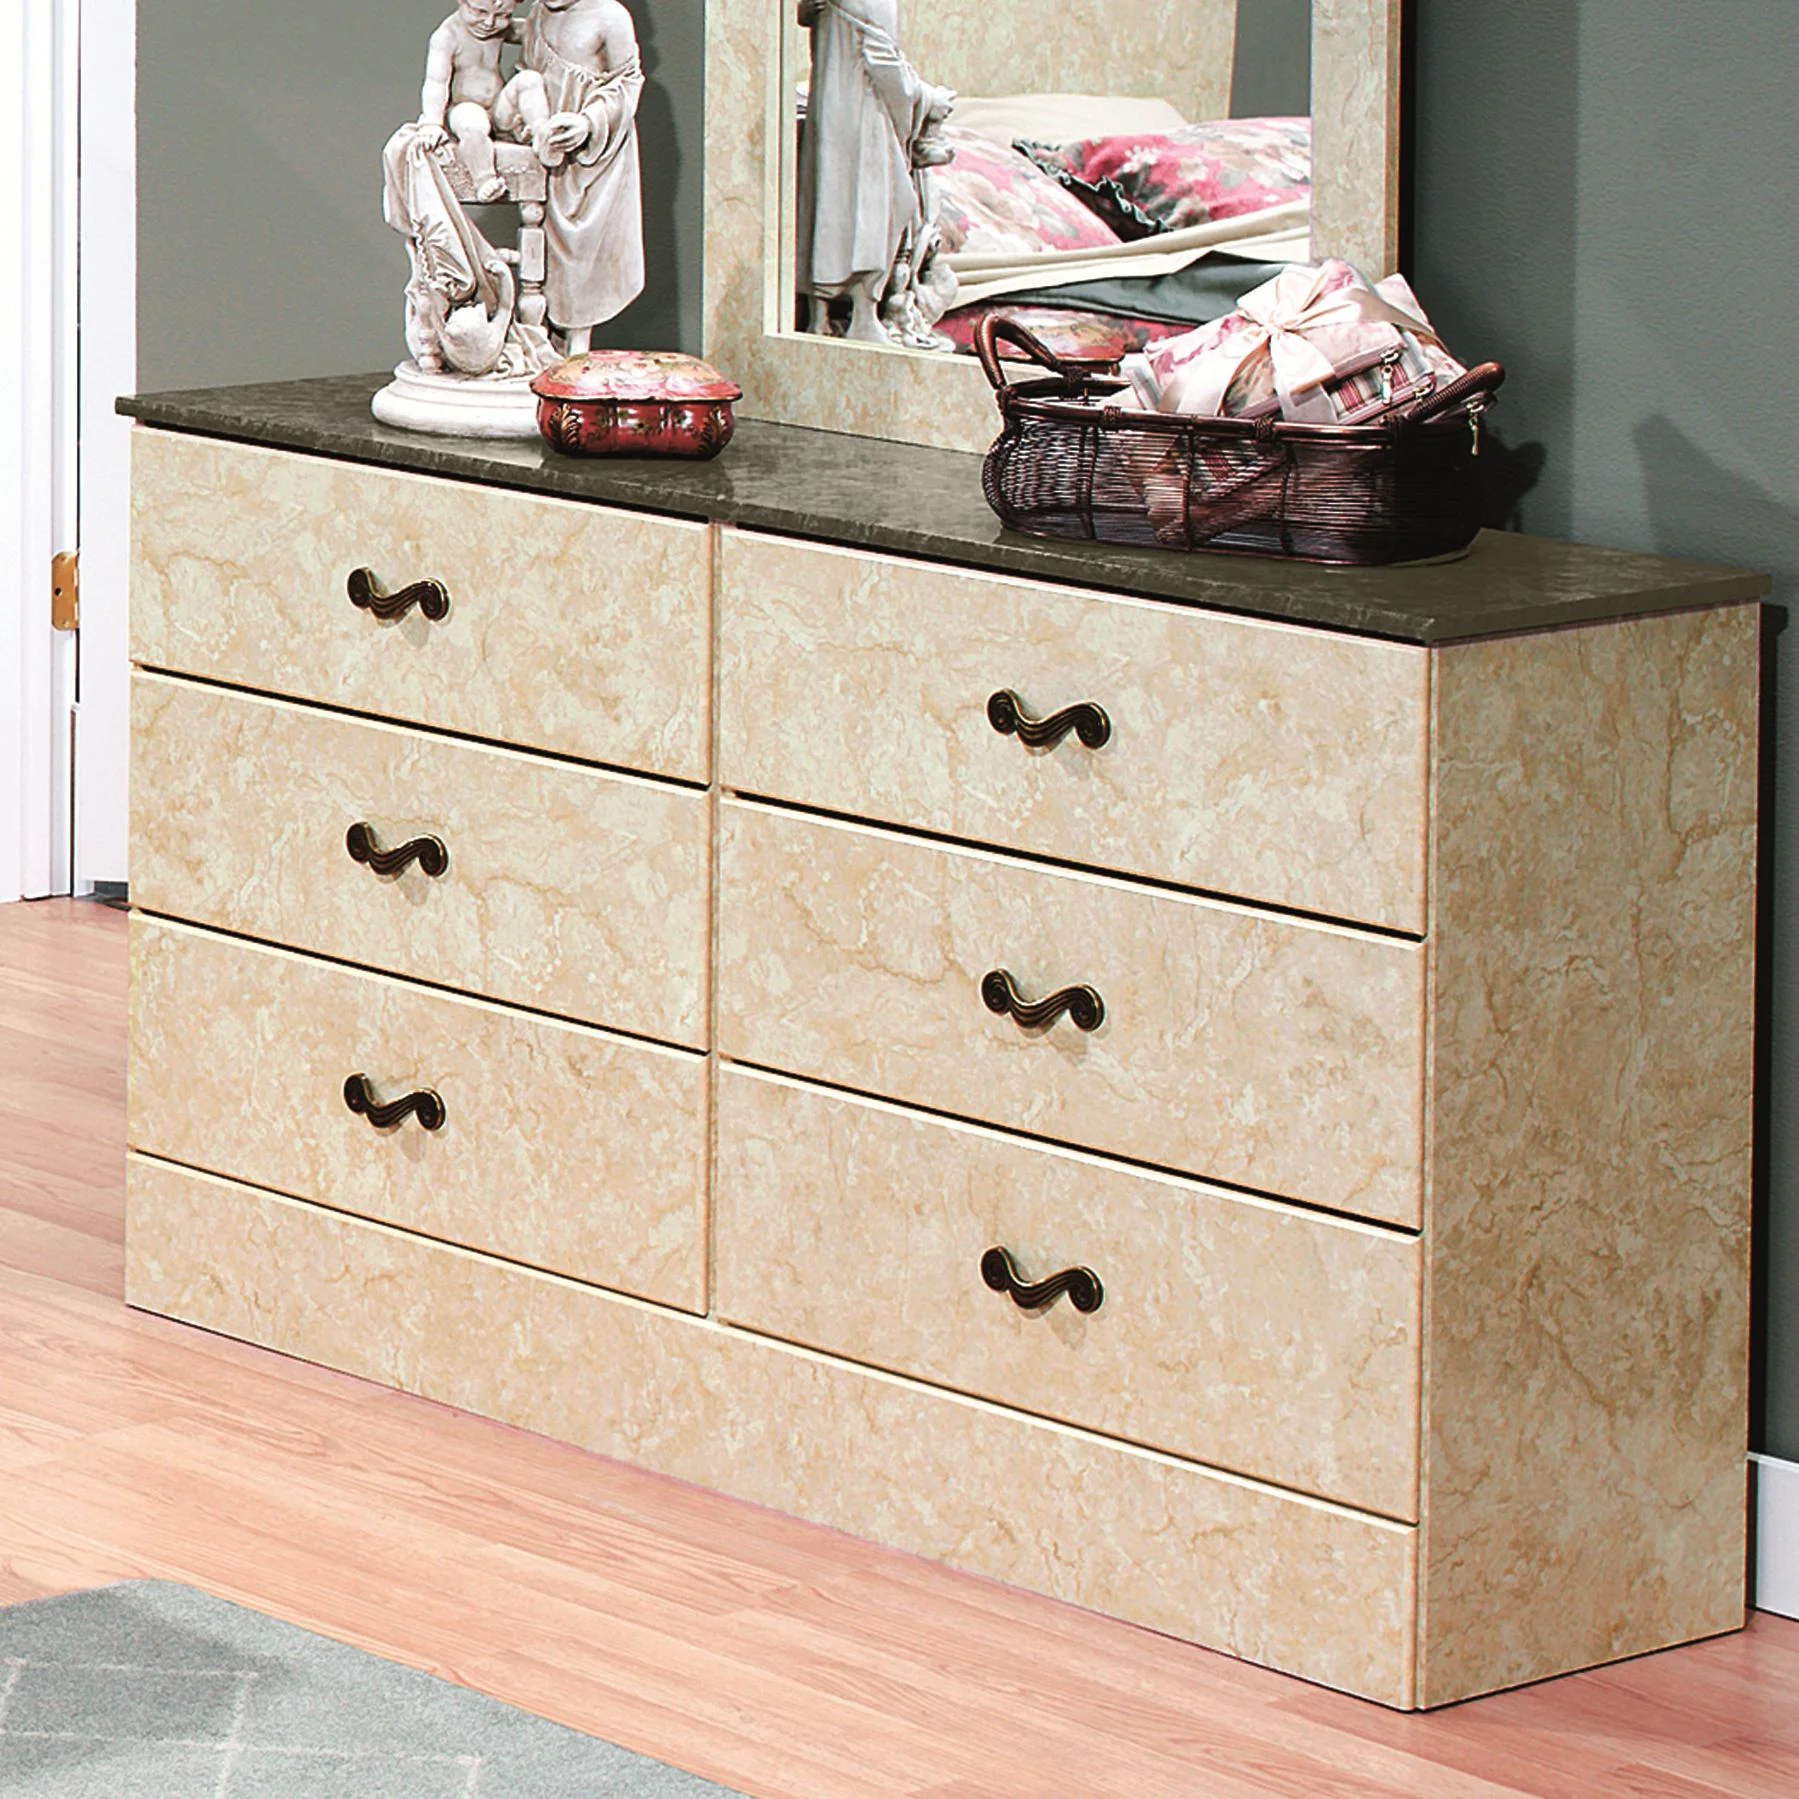 Perdue Sicilian Marble 6586 Two-Tone Faux Marble 6-Drawer Dresser